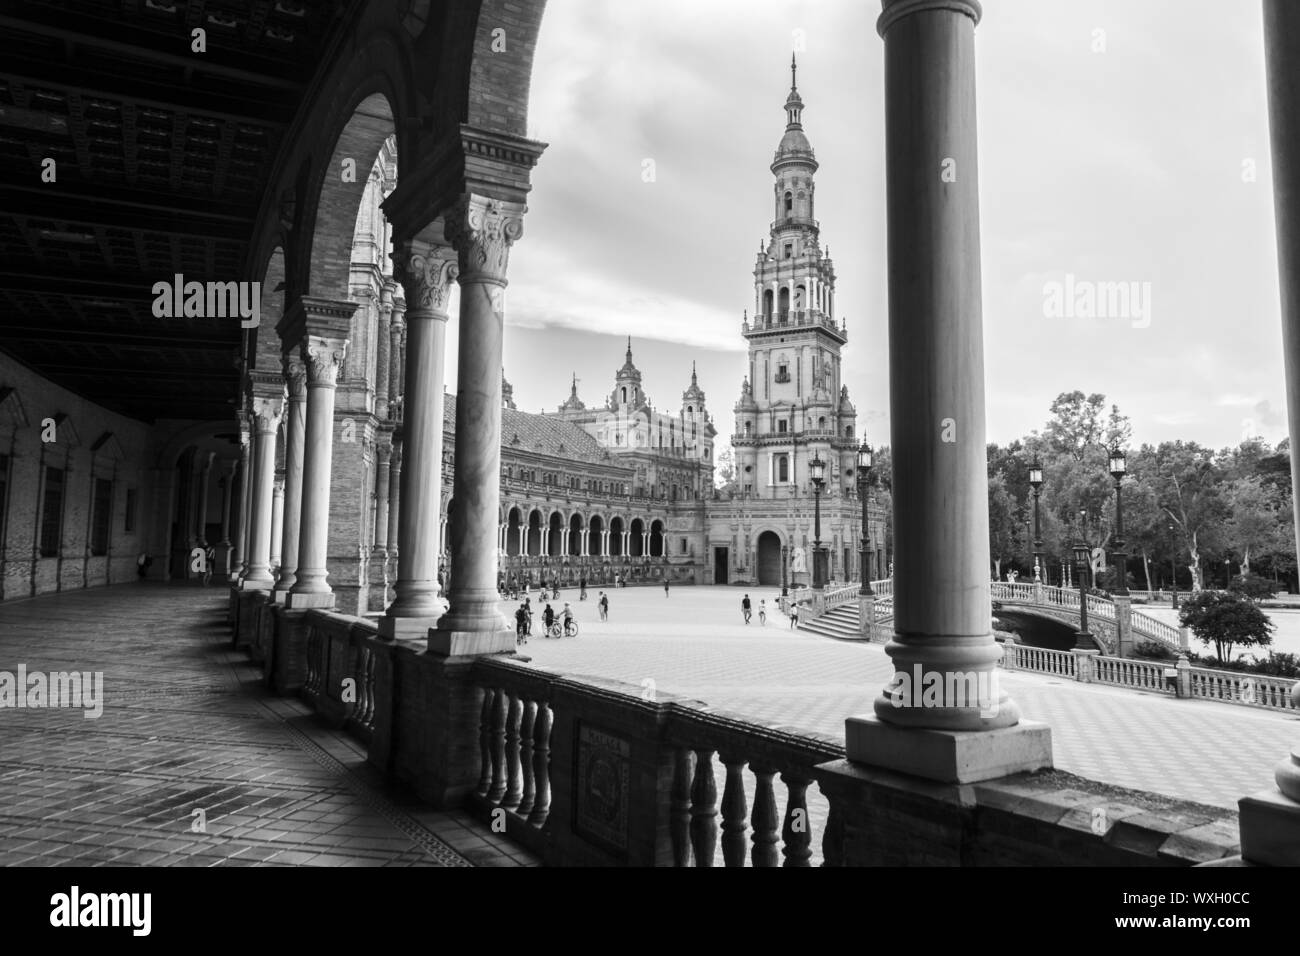 An image of the Plaza de Espana known in English as Spanish Plaza. One of the most popular tourist destinations in Seville, Spain. Stock Photo